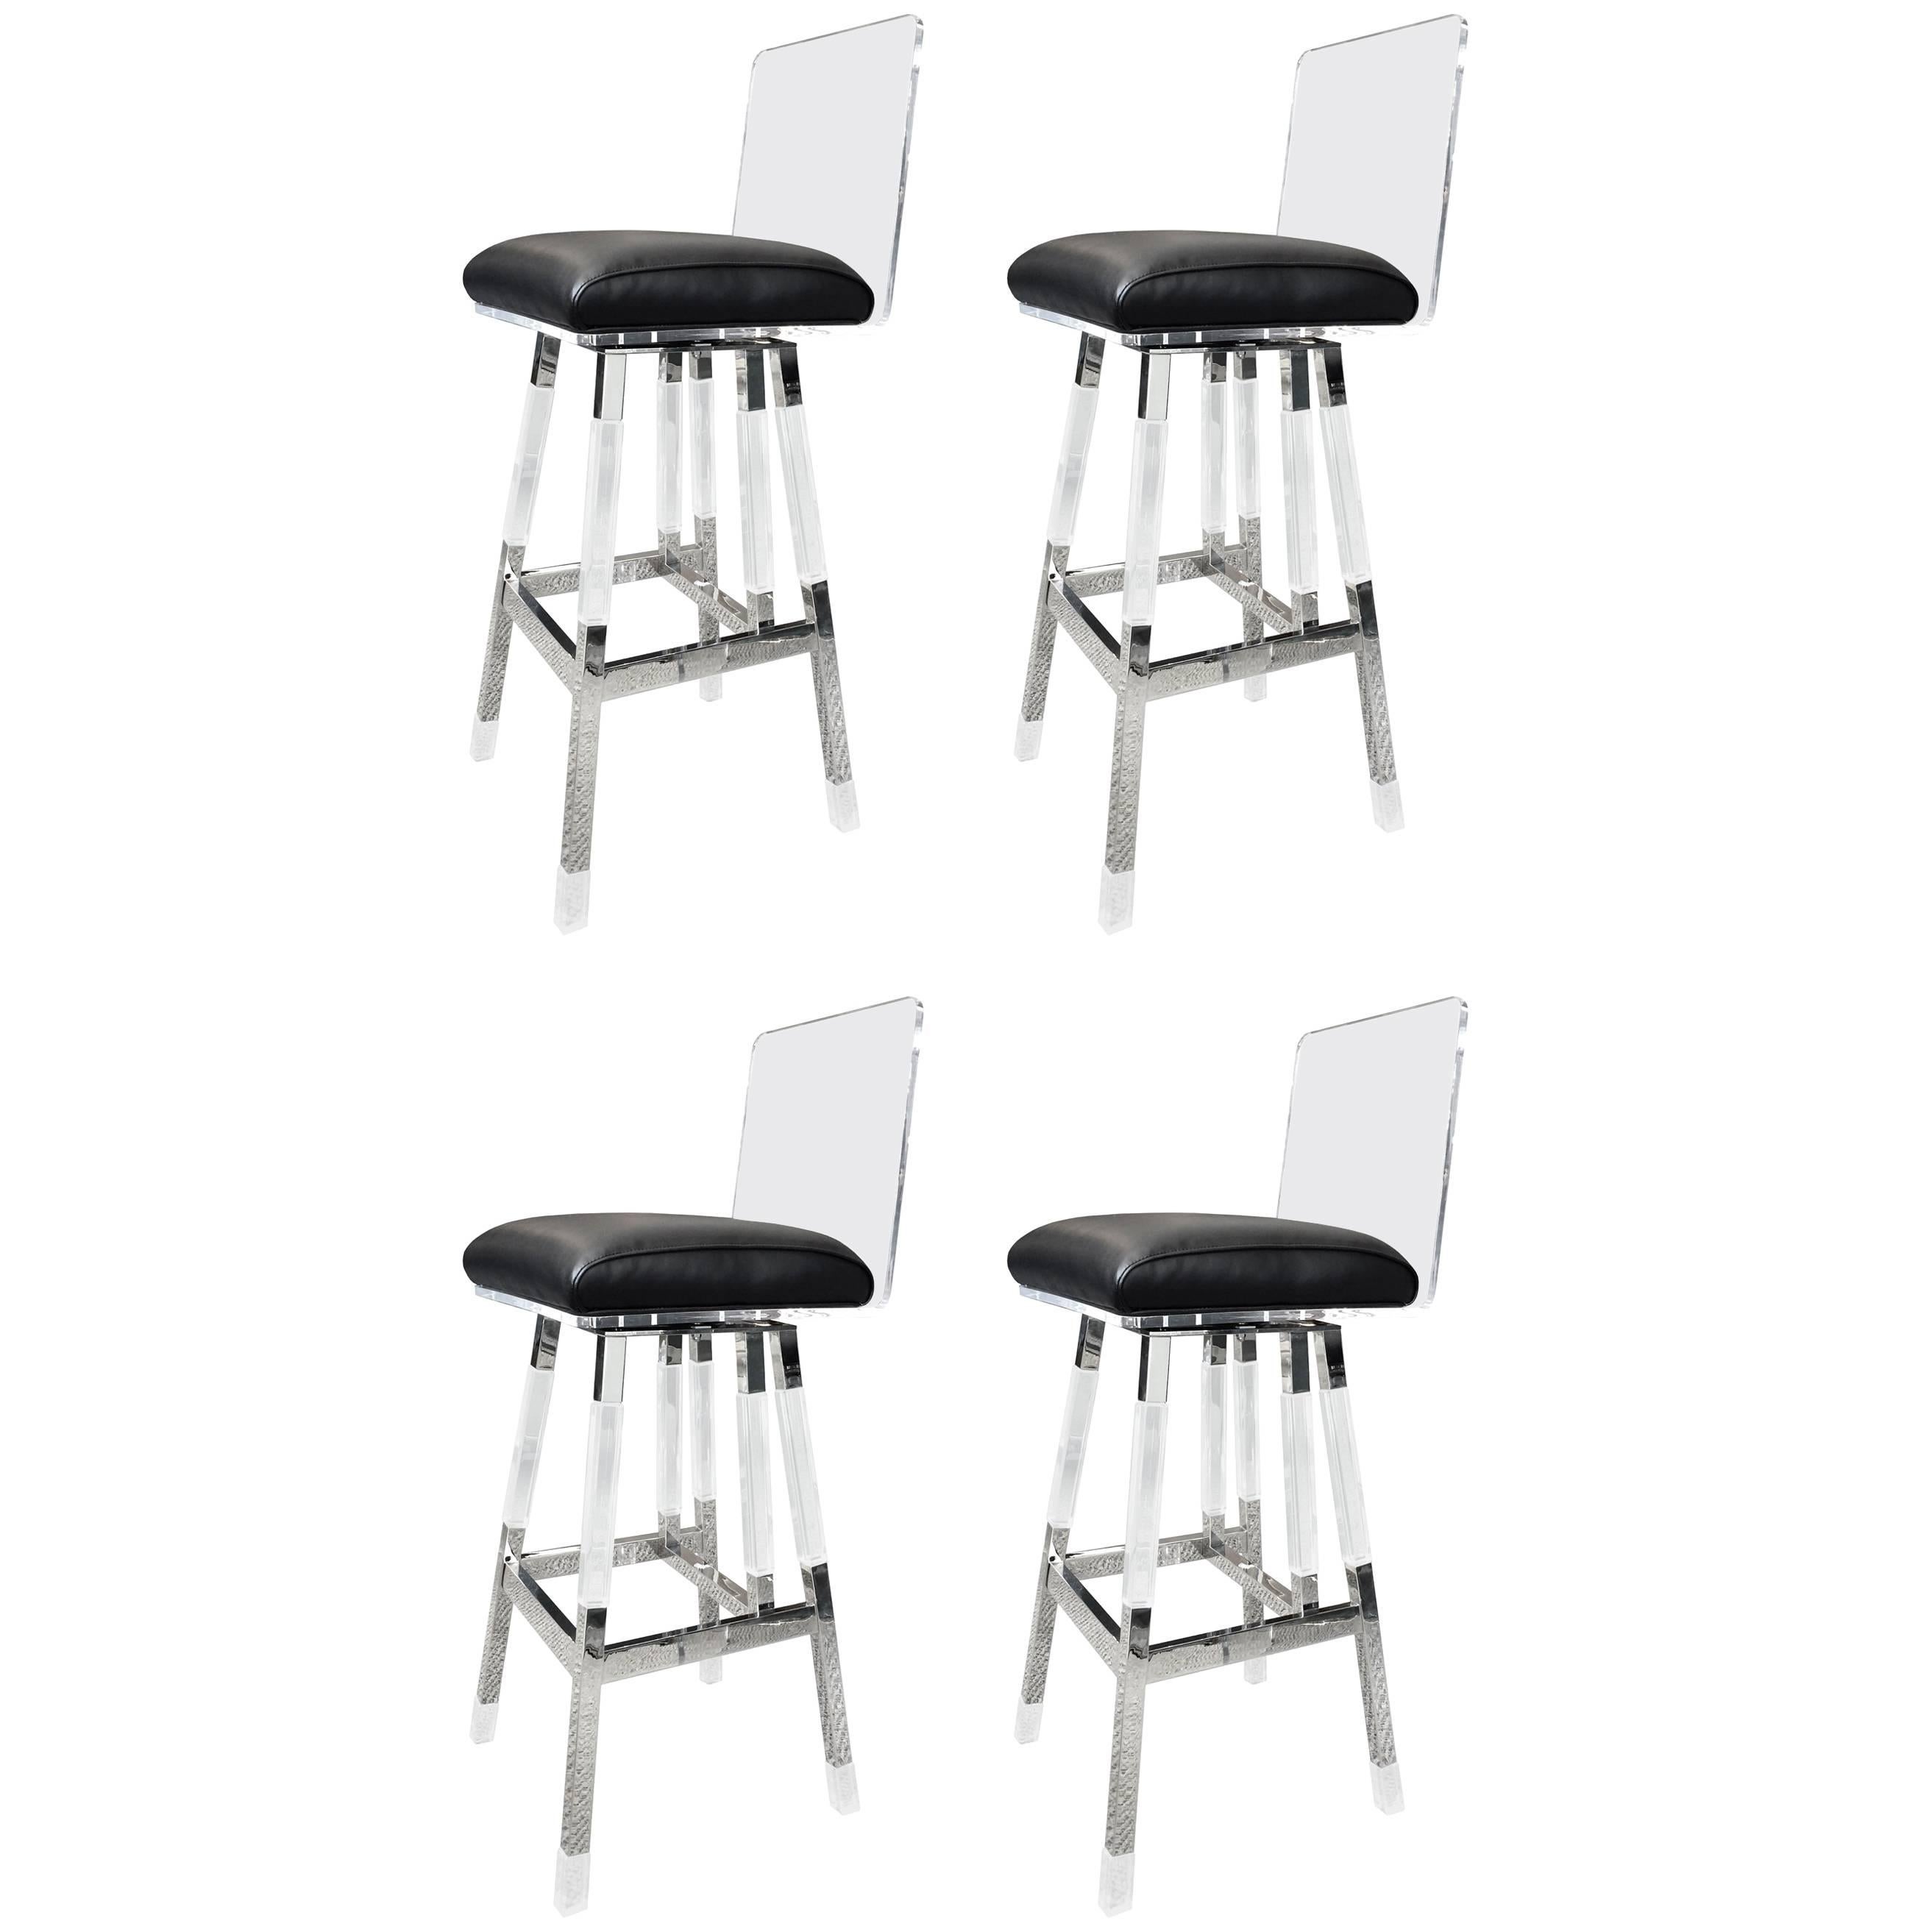 Charles Hollis Jones Barstools in Lucite and Polished Nickel "Metric" Collection